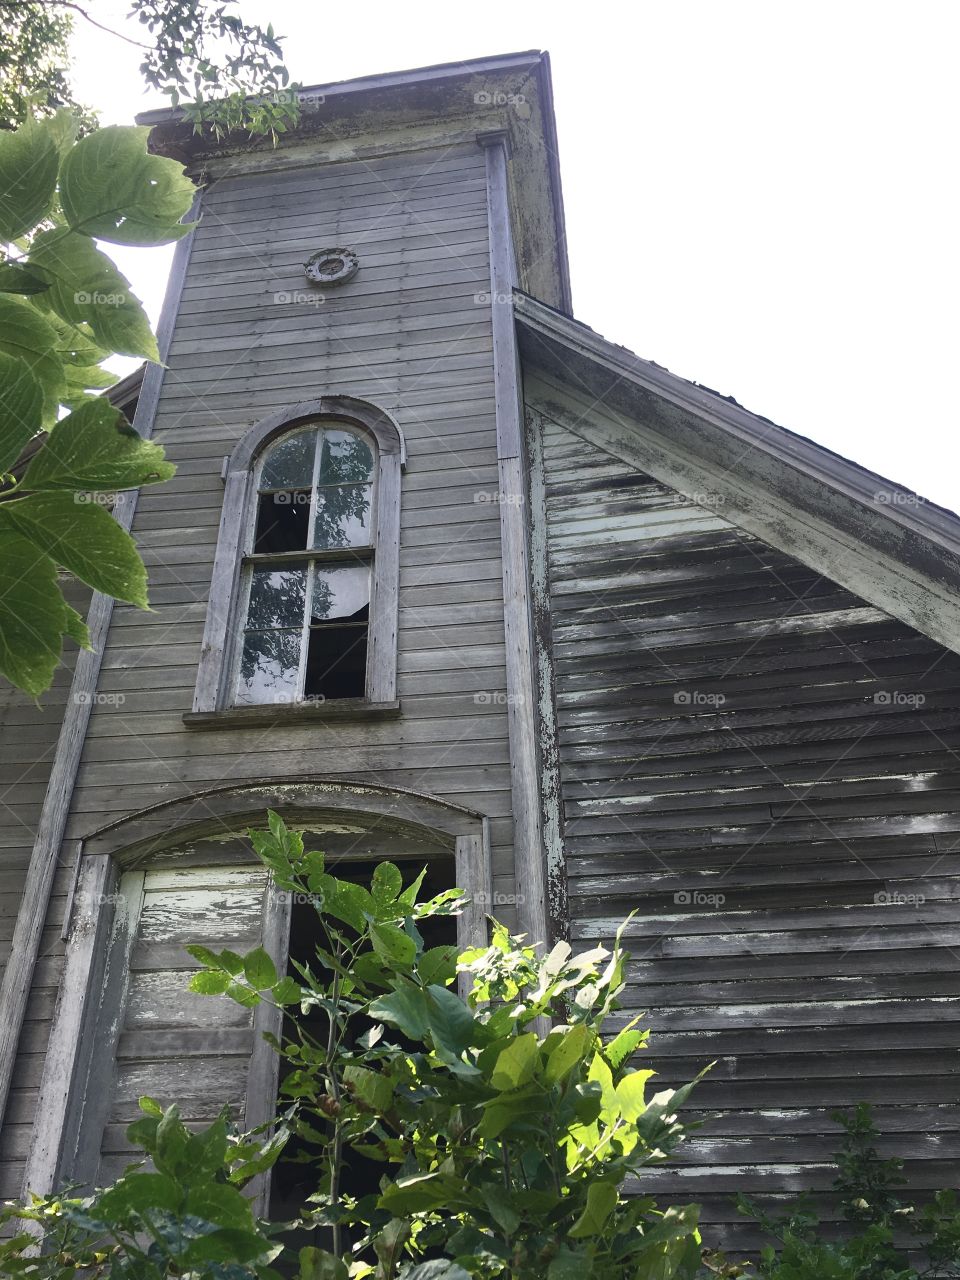 Abandoned church with paining peeled of that has graying wood & broken windows. Found in a small town in midwestern America.